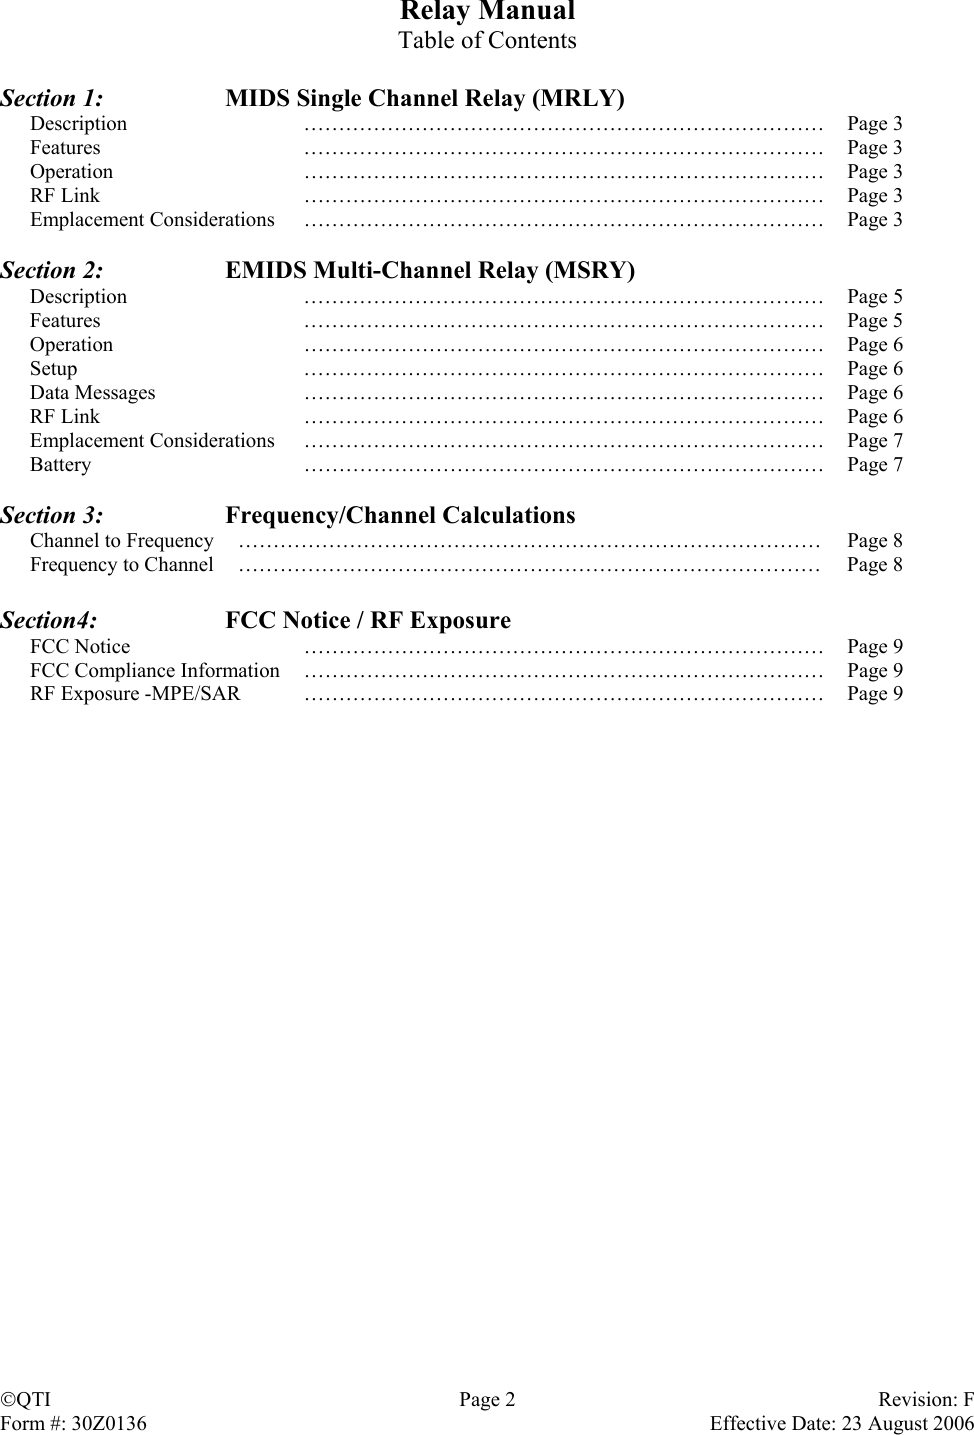 Relay Manual Table of Contents  Section 1:    MIDS Single Channel Relay (MRLY) Description ………………………………………………………………… Page 3 Features ………………………………………………………………… Page 3 Operation ………………………………………………………………… Page 3 RF Link  …………………………………………………………………  Page 3 Emplacement Considerations  …………………………………………………………………  Page 3  Section 2:    EMIDS Multi-Channel Relay (MSRY) Description ………………………………………………………………… Page 5 Features ………………………………………………………………… Page 5 Operation ………………………………………………………………… Page 6 Setup ………………………………………………………………… Page 6 Data Messages  …………………………………………………………………  Page 6 RF Link  …………………………………………………………………  Page 6 Emplacement Considerations  …………………………………………………………………  Page 7 Battery ………………………………………………………………… Page 7  Section 3:   Frequency/Channel Calculations Channel to Frequency  …………………………………………………………………………  Page 8 Frequency to Channel  …………………………………………………………………………  Page 8  Section4:   FCC Notice / RF Exposure FCC Notice  …………………………………………………………………  Page 9 FCC Compliance Information  …………………………………………………………………  Page 9 RF Exposure -MPE/SAR  …………………………………………………………………  Page 9 QTI  Page 2  Revision: F Form #: 30Z0136    Effective Date: 23 August 2006 